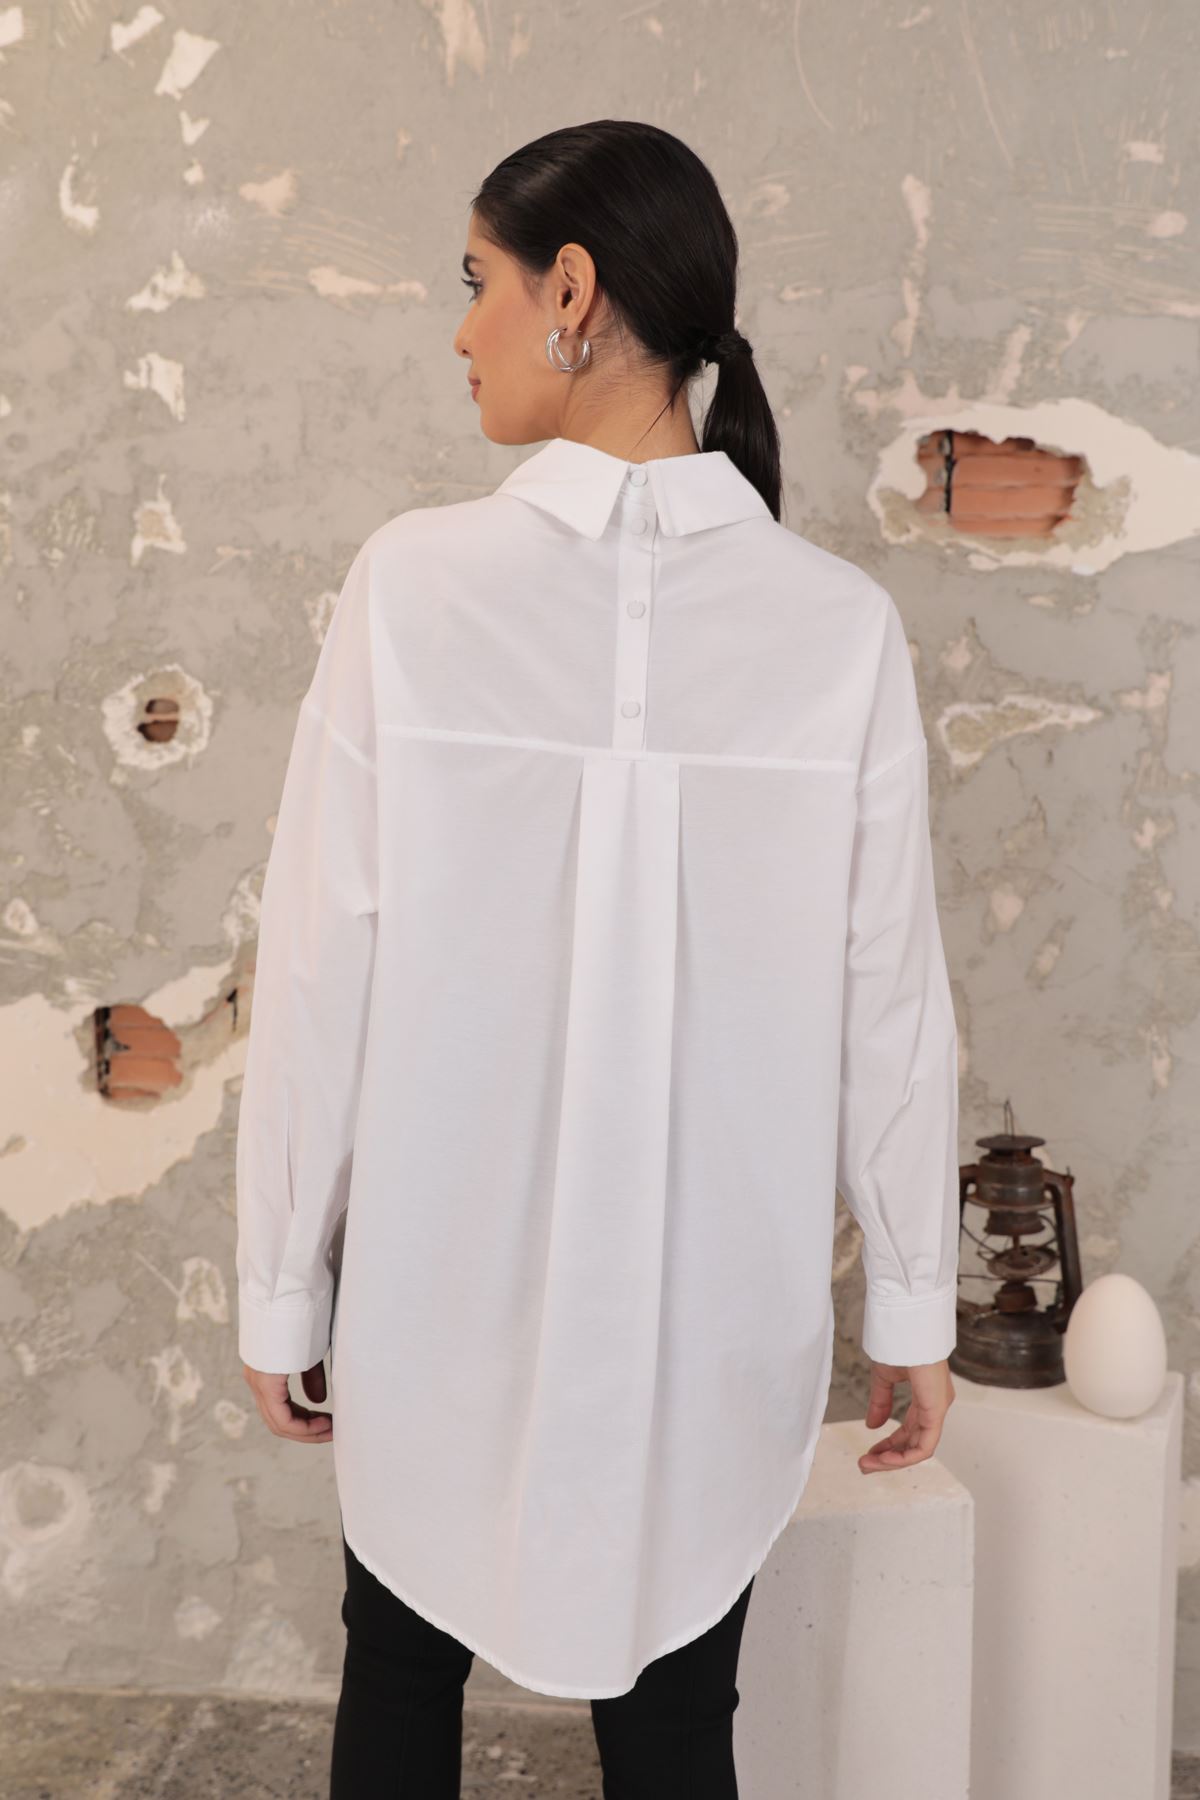 Soft Sleeve And Back Roba Button Detail Women's Shirt-White